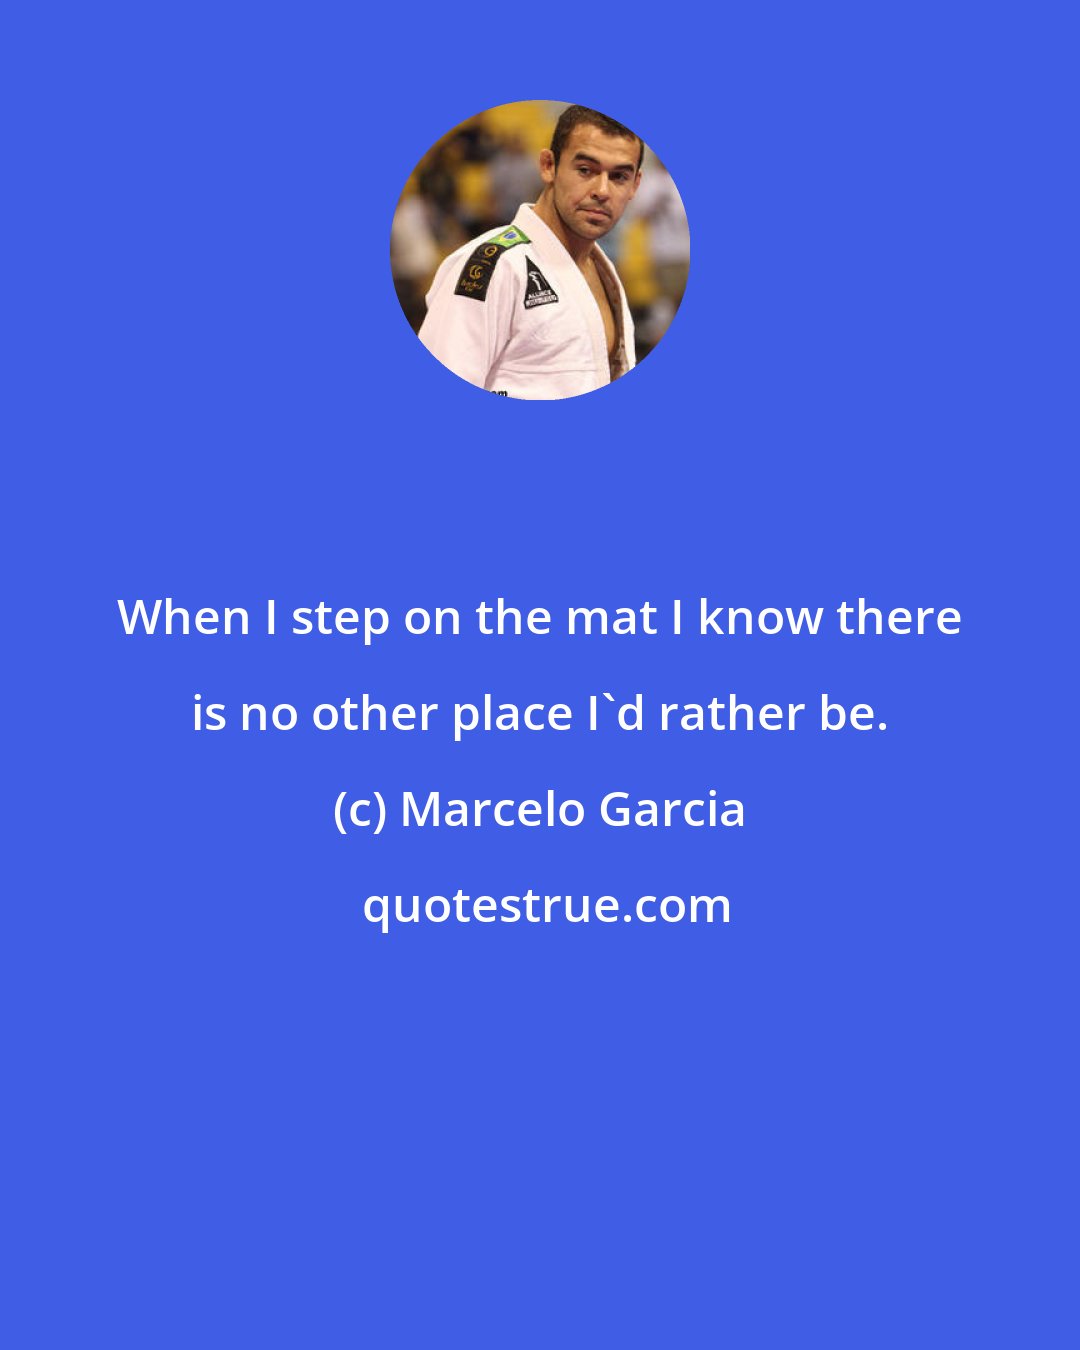 Marcelo Garcia: When I step on the mat I know there is no other place I'd rather be.